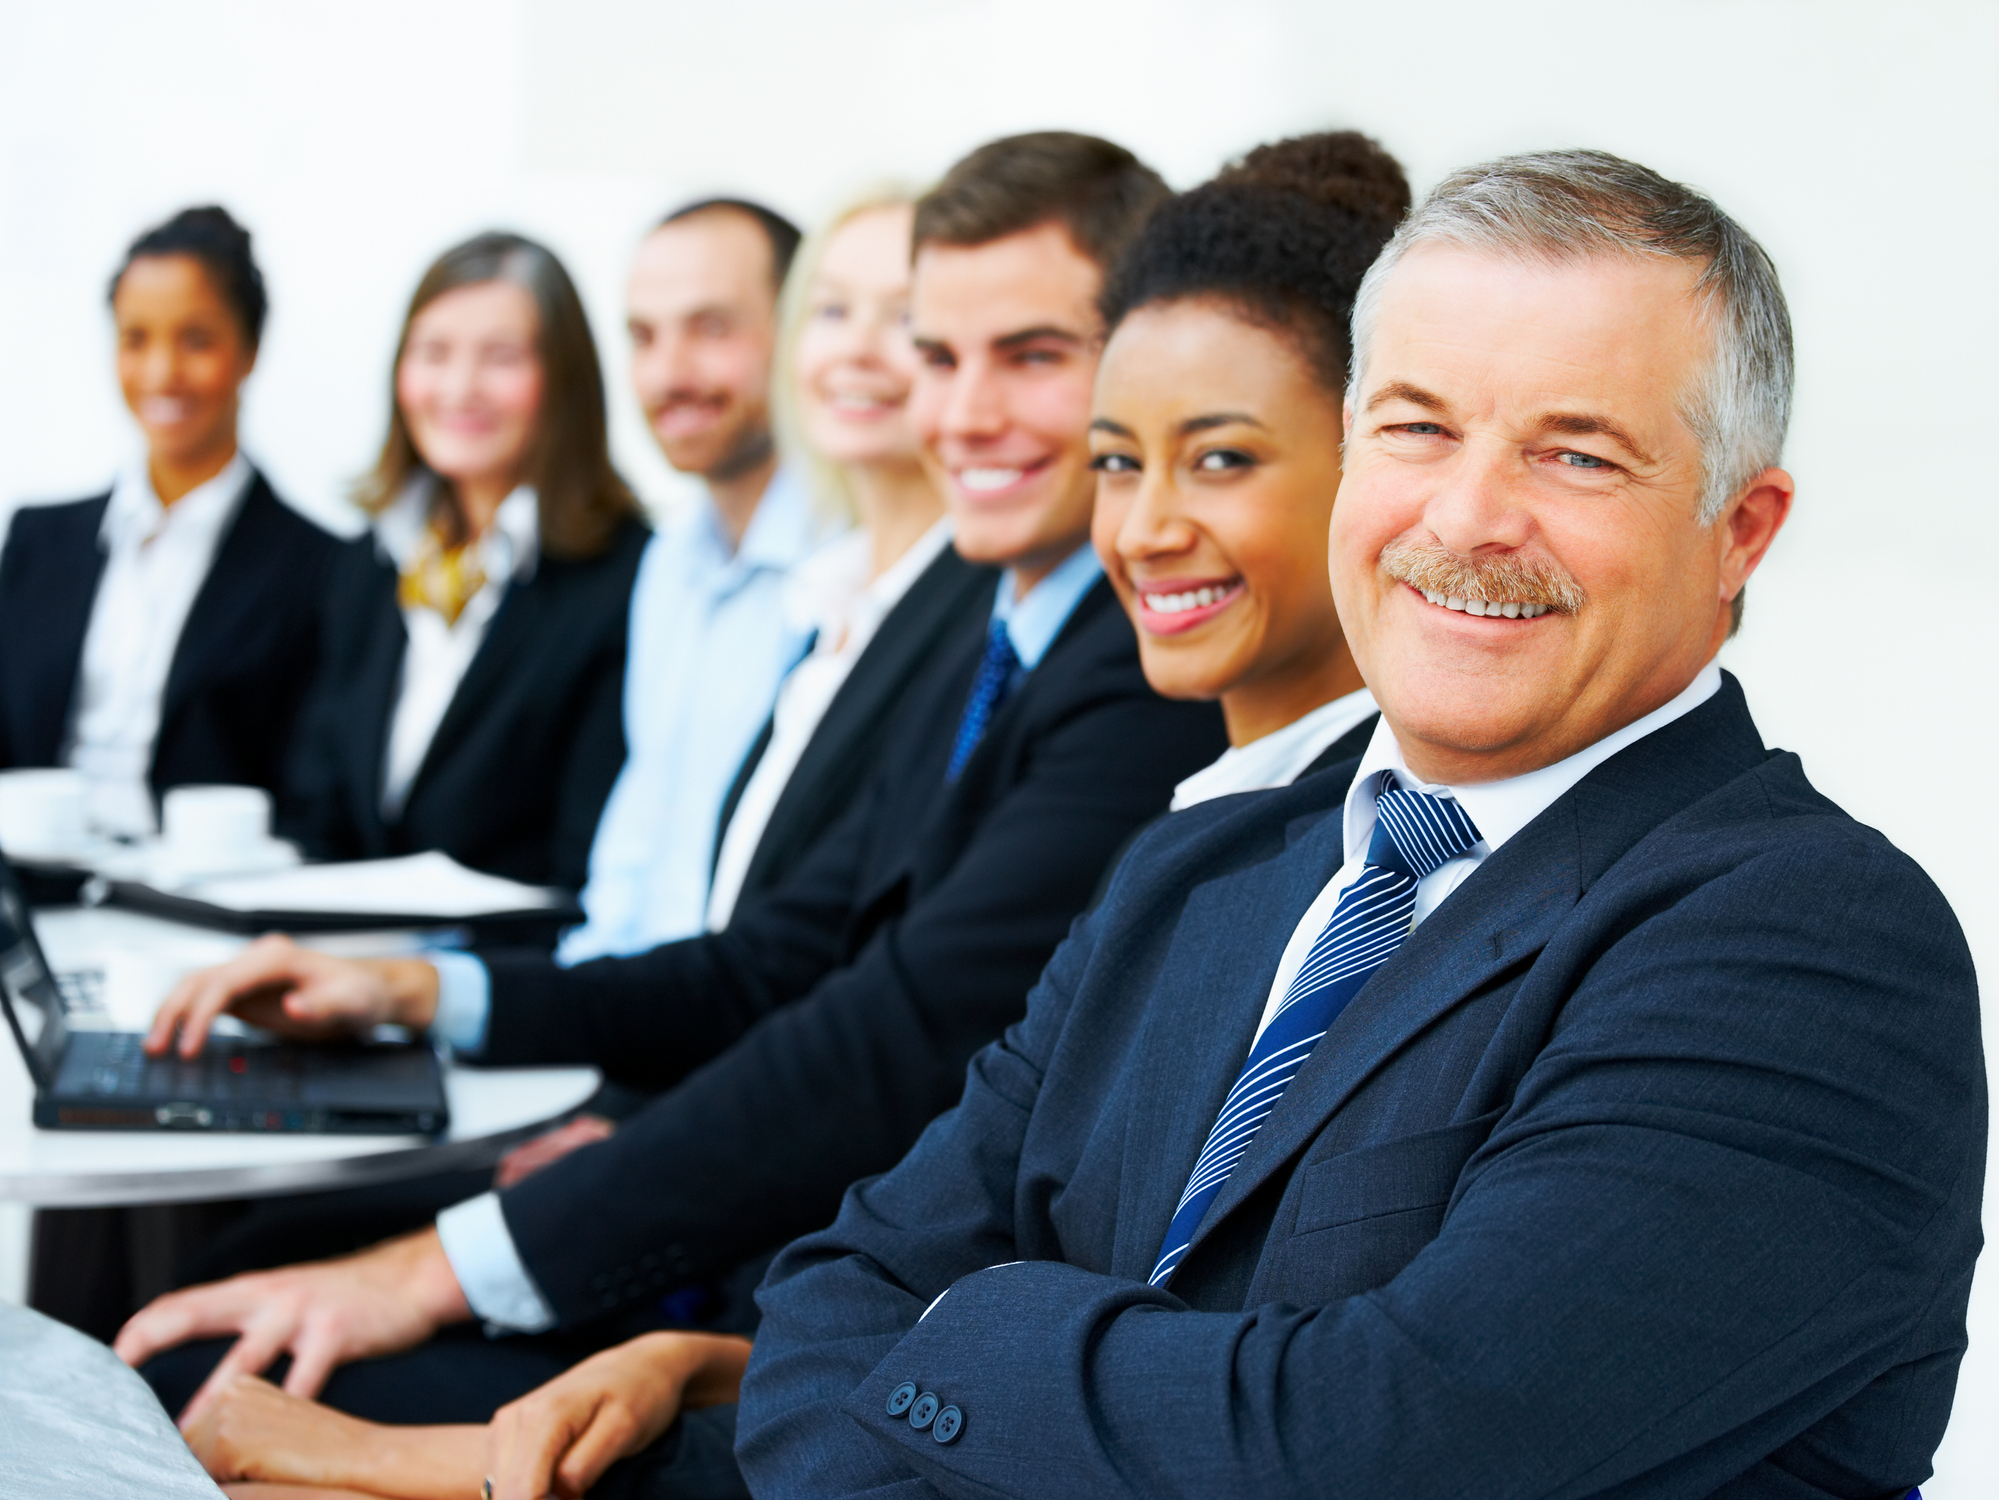 Business people smiling in a meeting